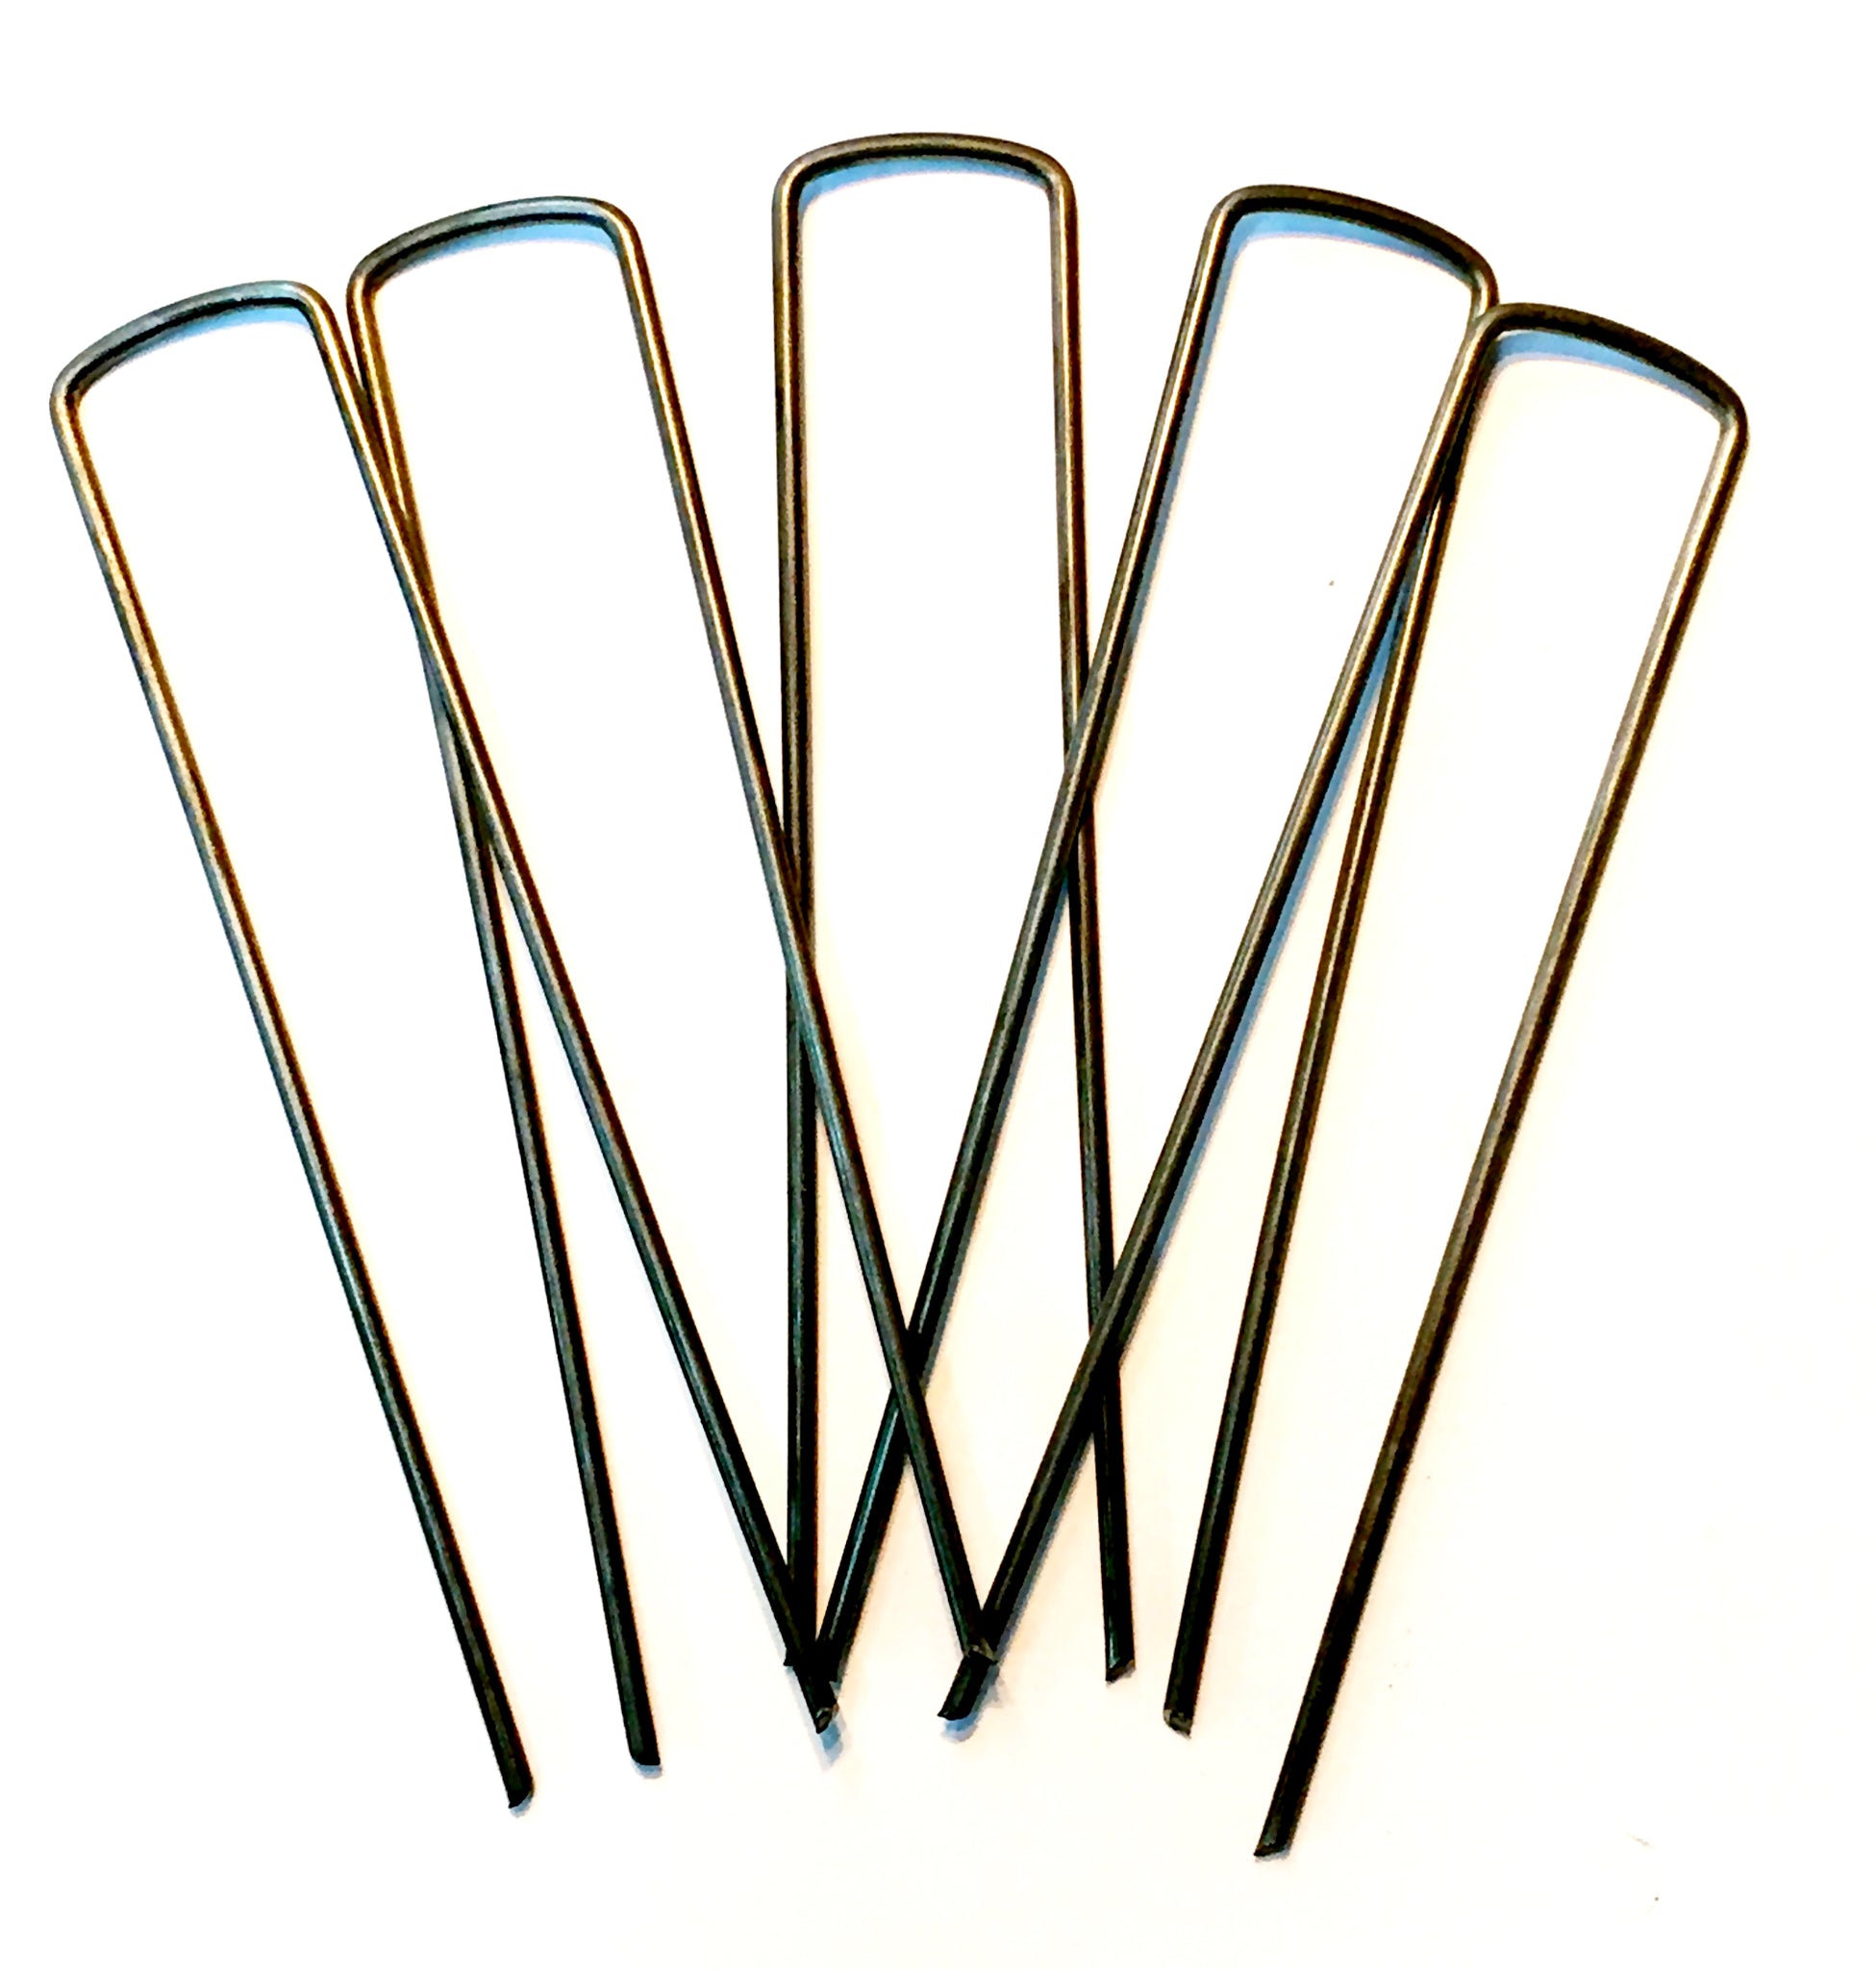 500 Commercial 6in 11ga Landscape Stakes, Weed Barrier Fabric Pins